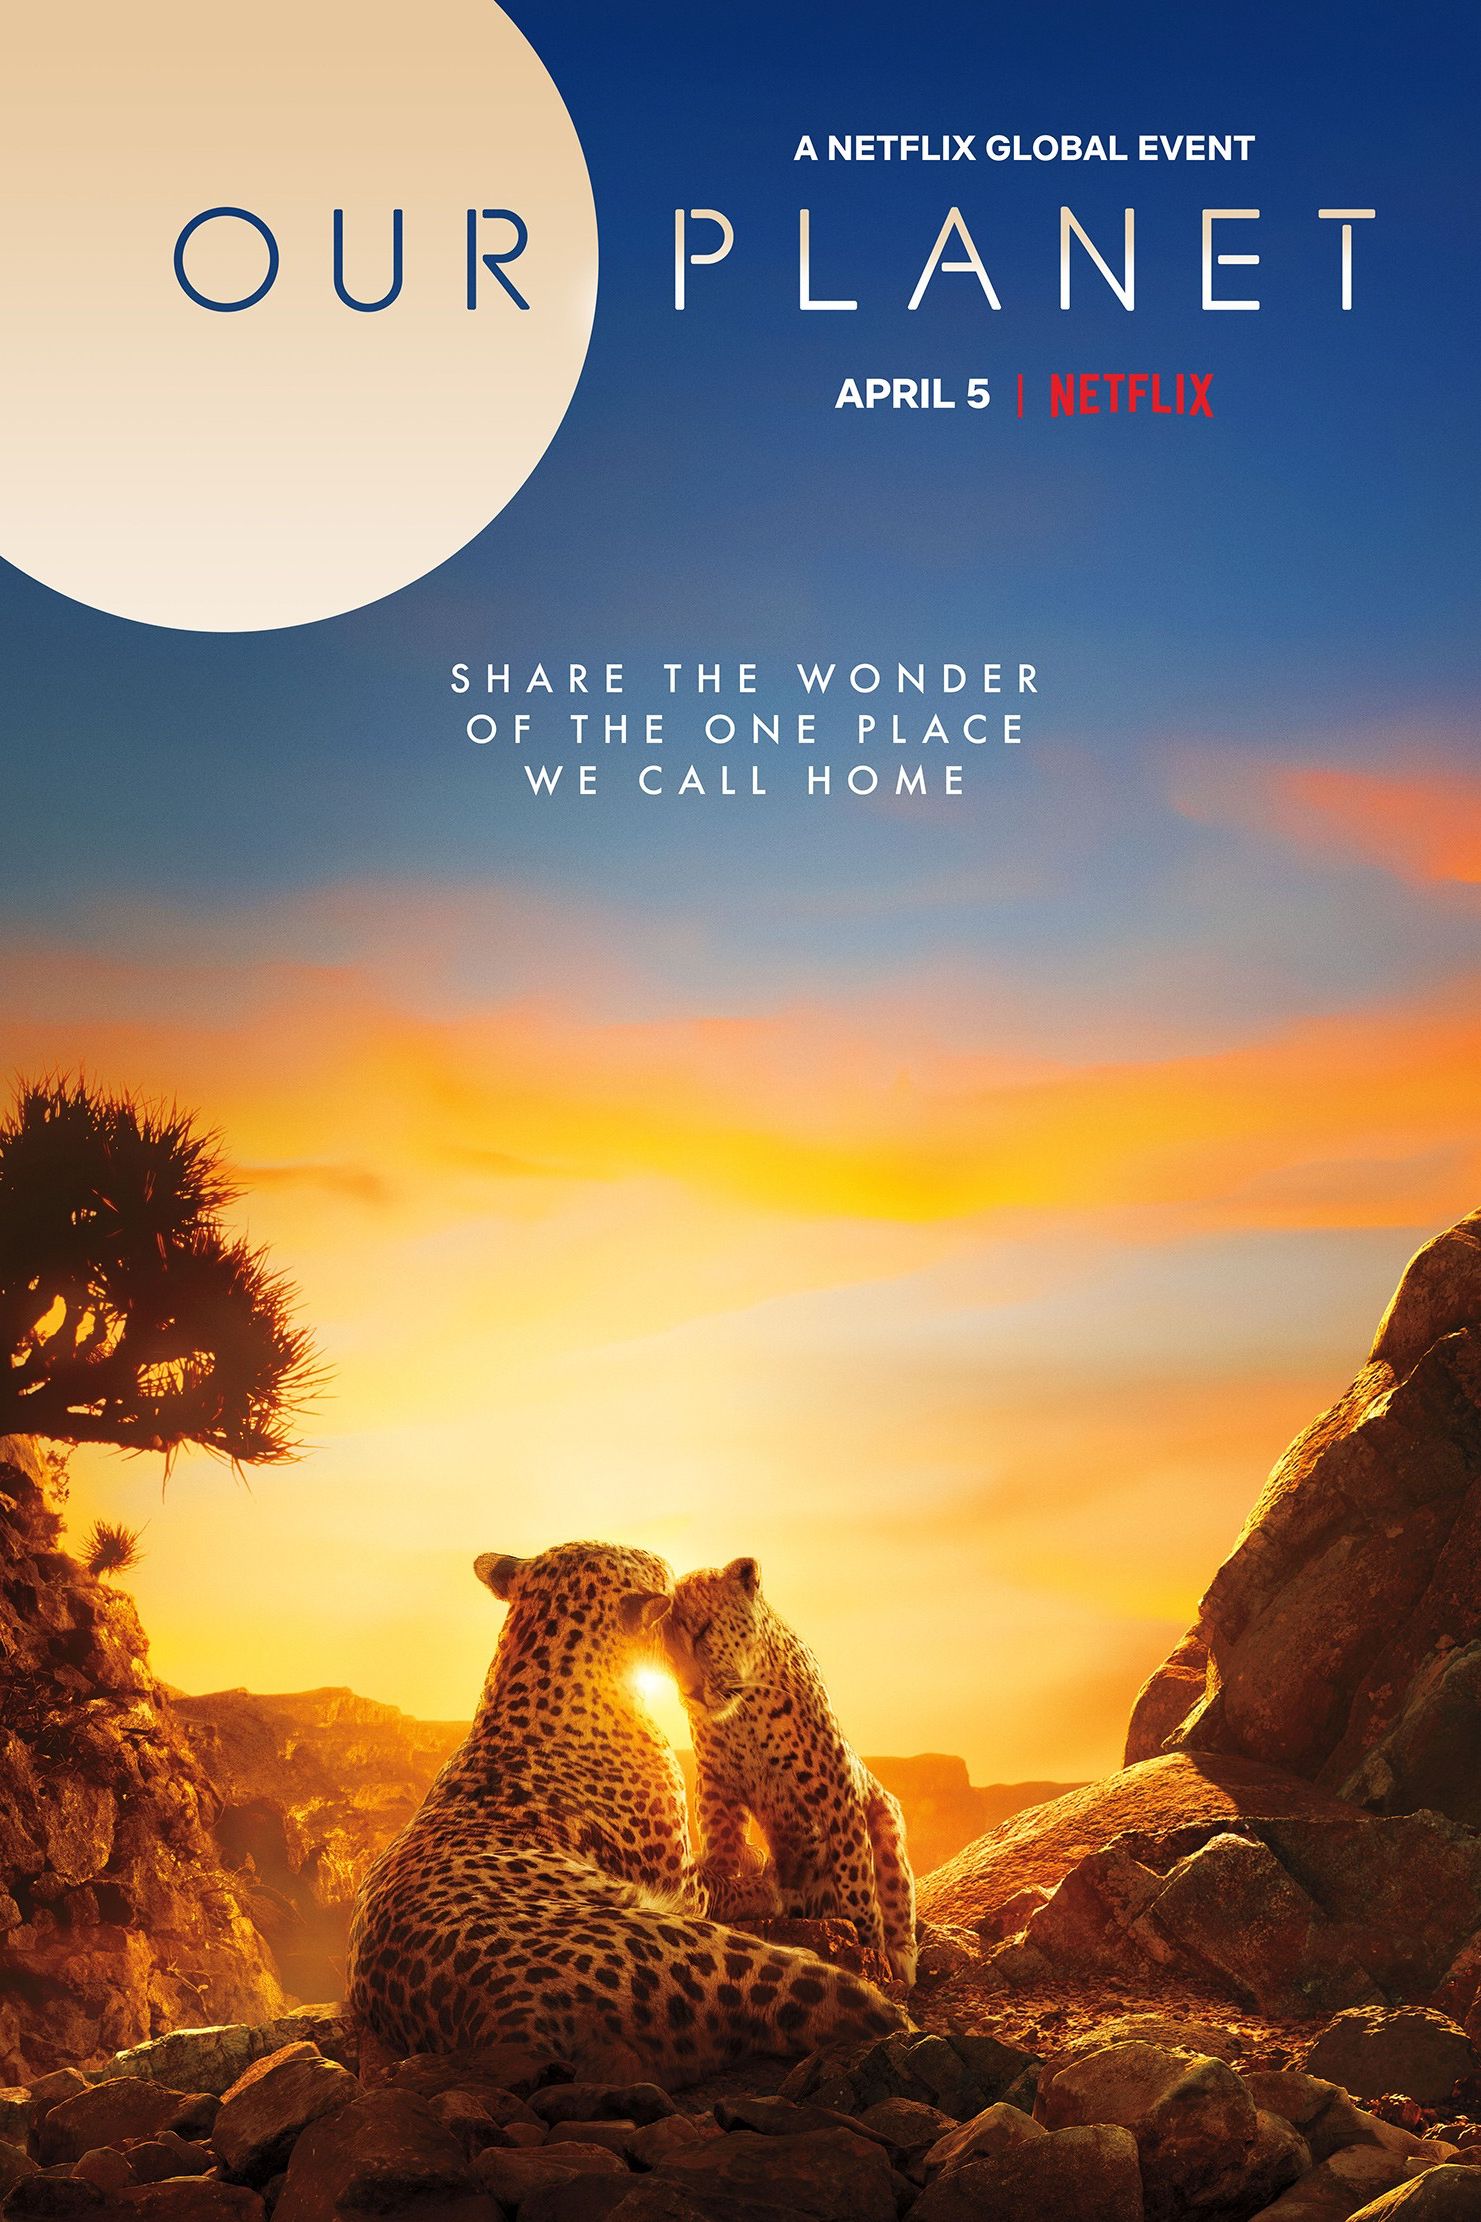 Our Planet Netflix TV Poster